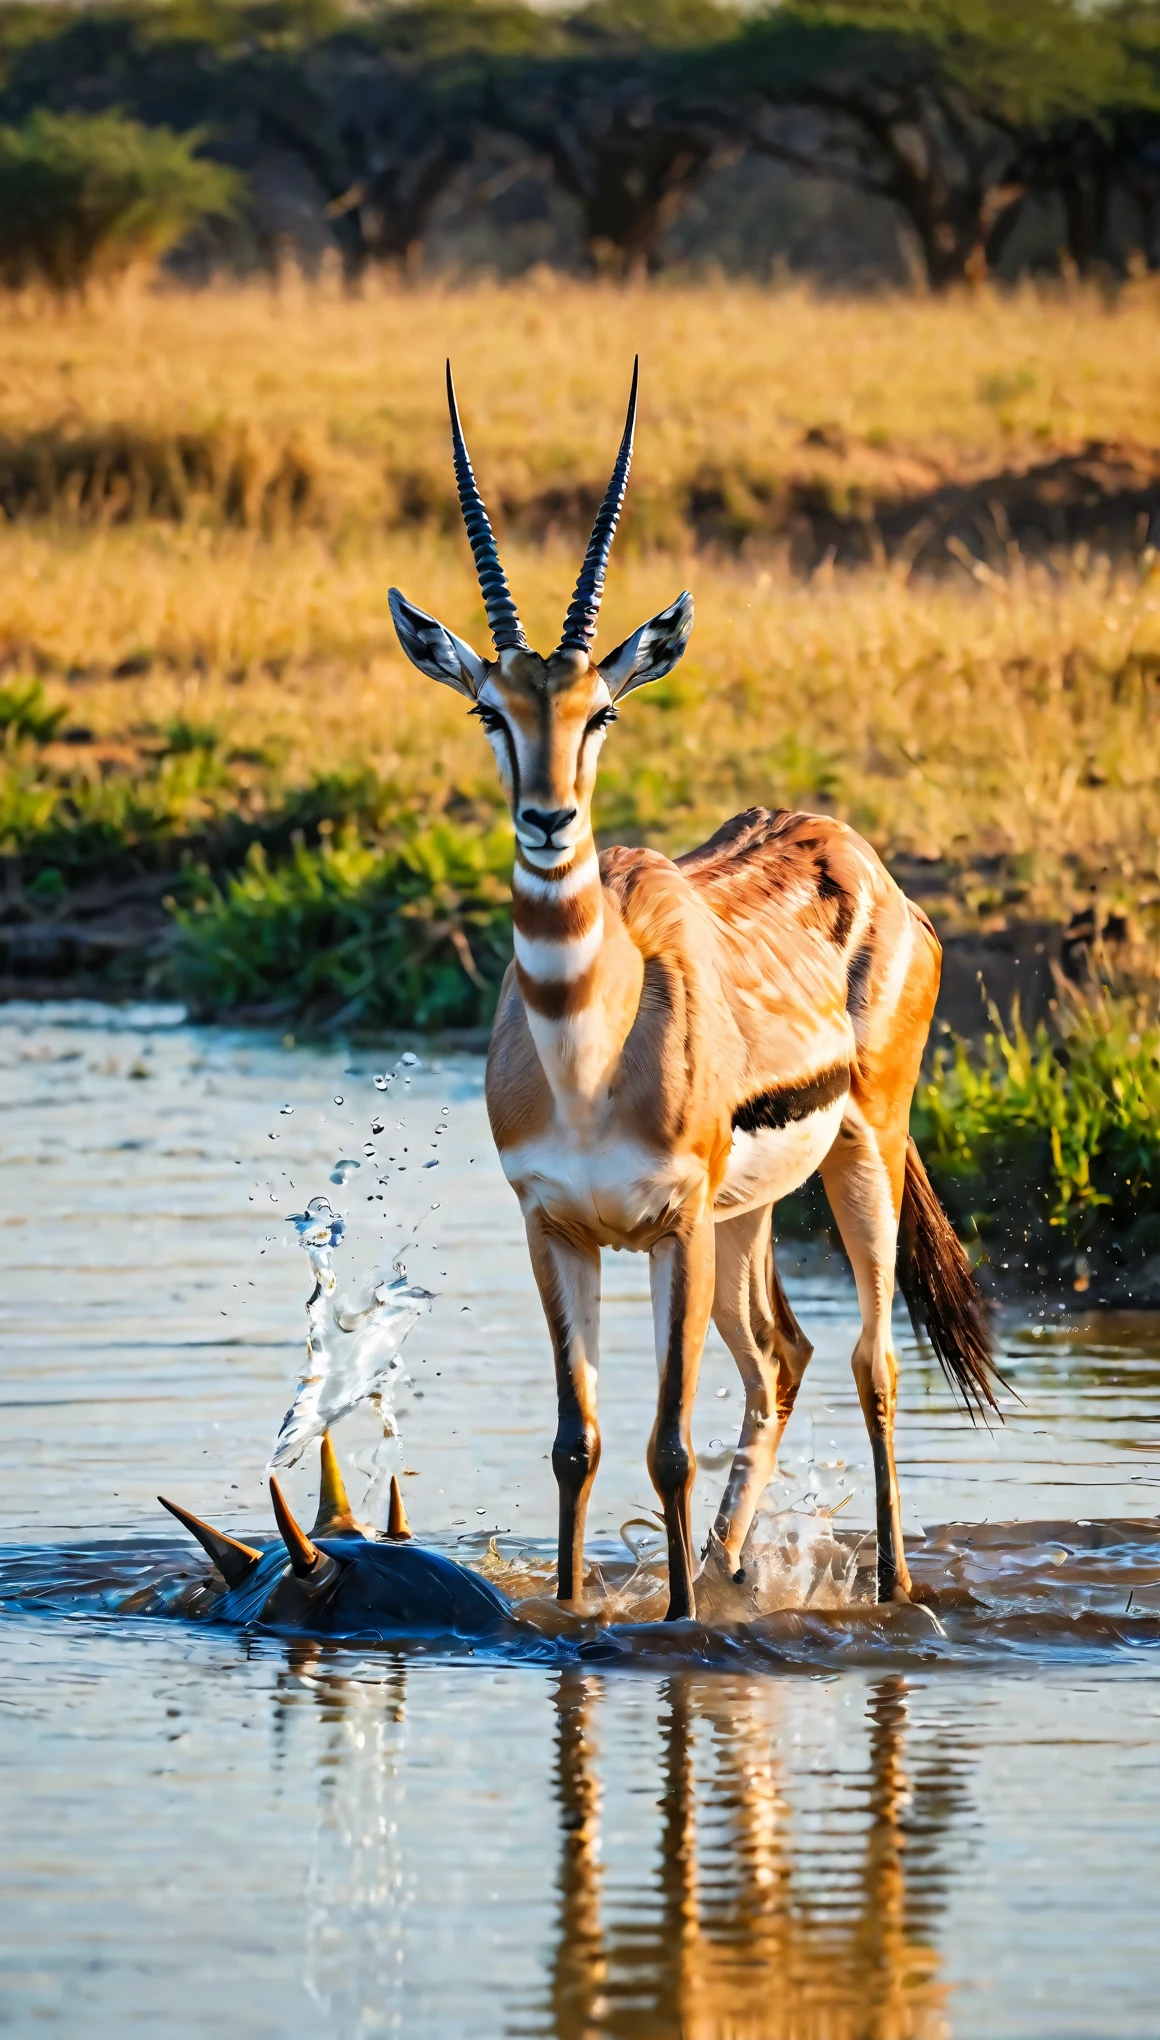 (best quality, realistic, raw, highres), African wildlife, animal photography, wild African steppe, gazelle drinking water by the river, lurking crocodile, fleeting moment, intense predator-prey interaction, precise capture, remarkable details, powerful composition, vibrant colors, natural lighting